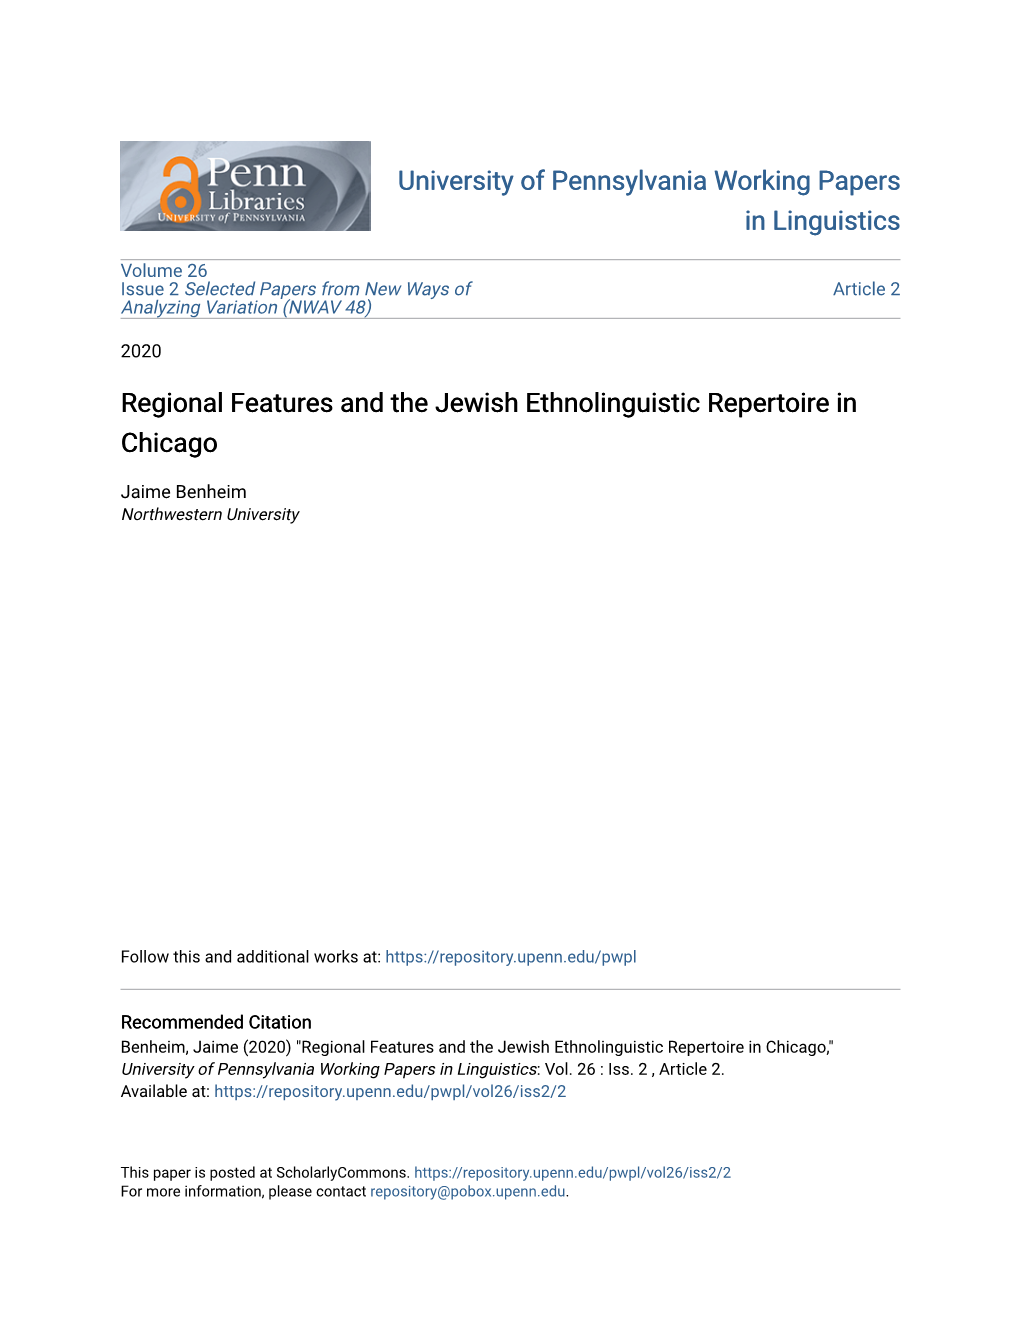 Regional Features and the Jewish Ethnolinguistic Repertoire in Chicago